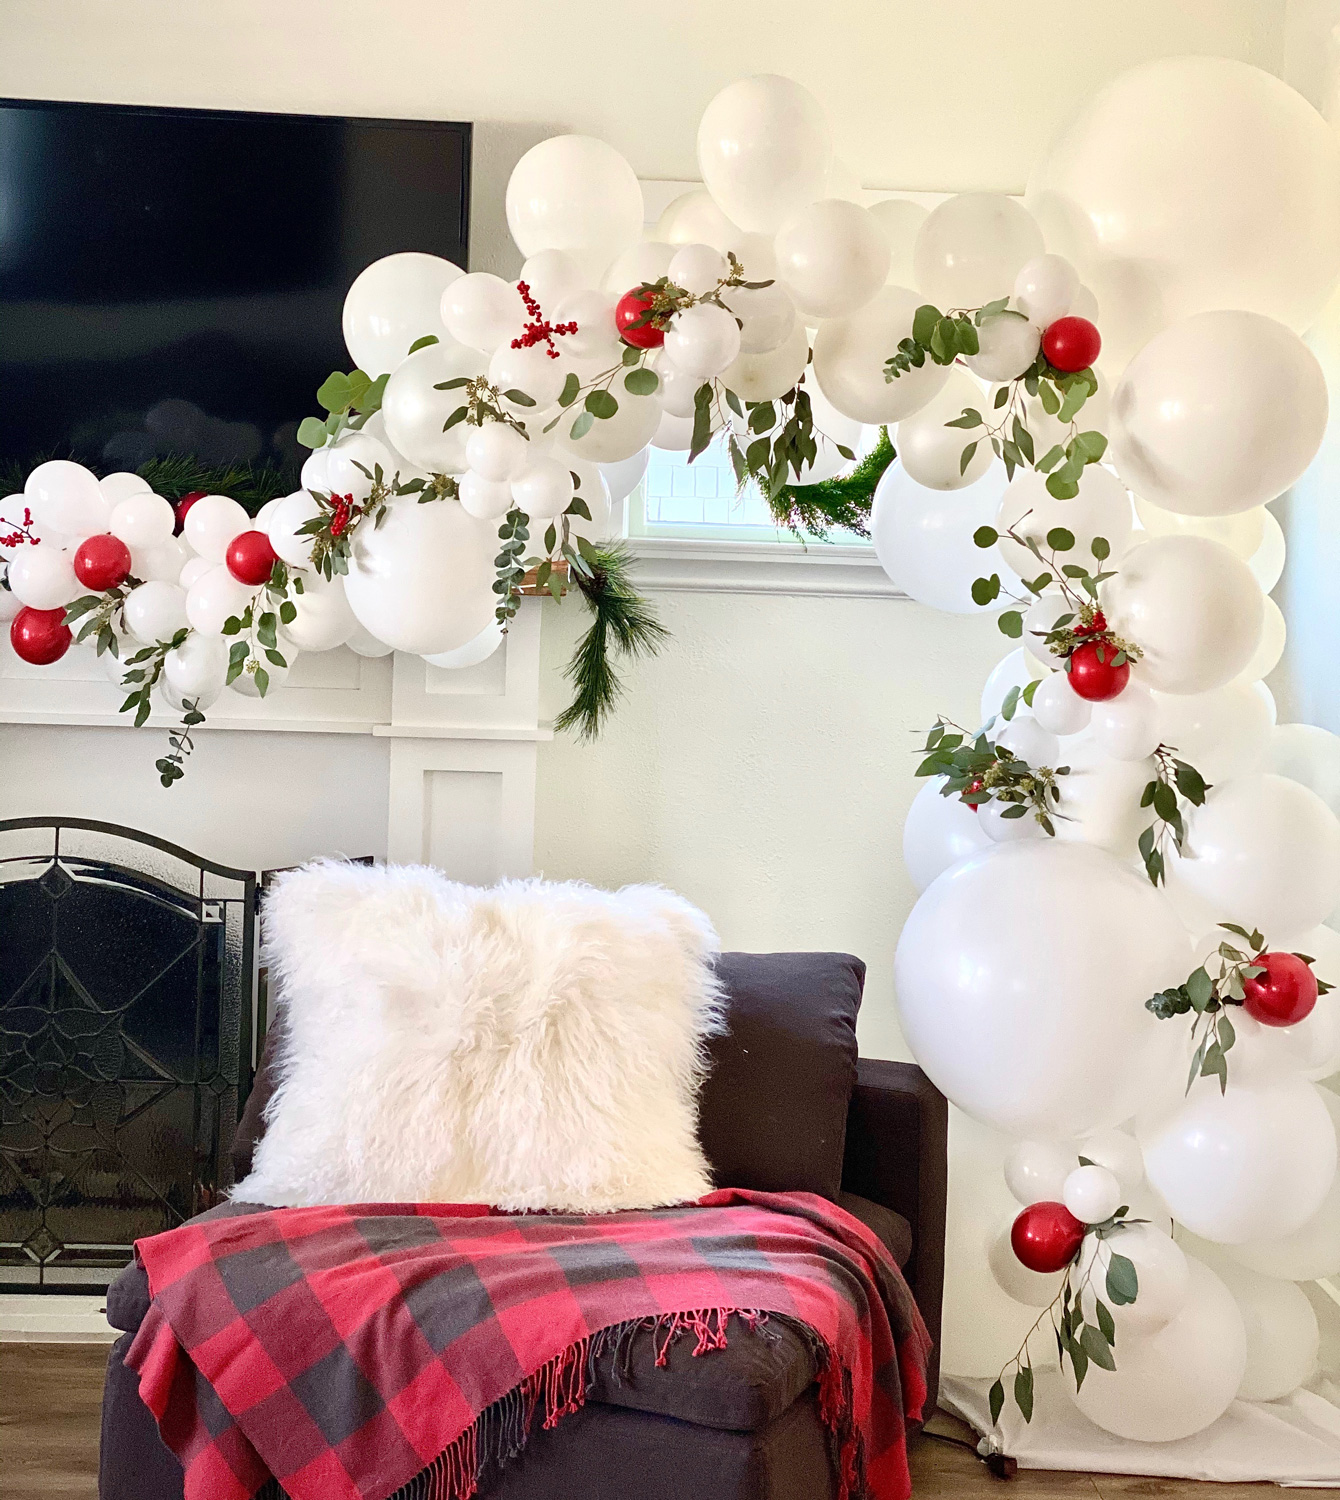 Bay Area Balloon - White Organic Arch with Greenery